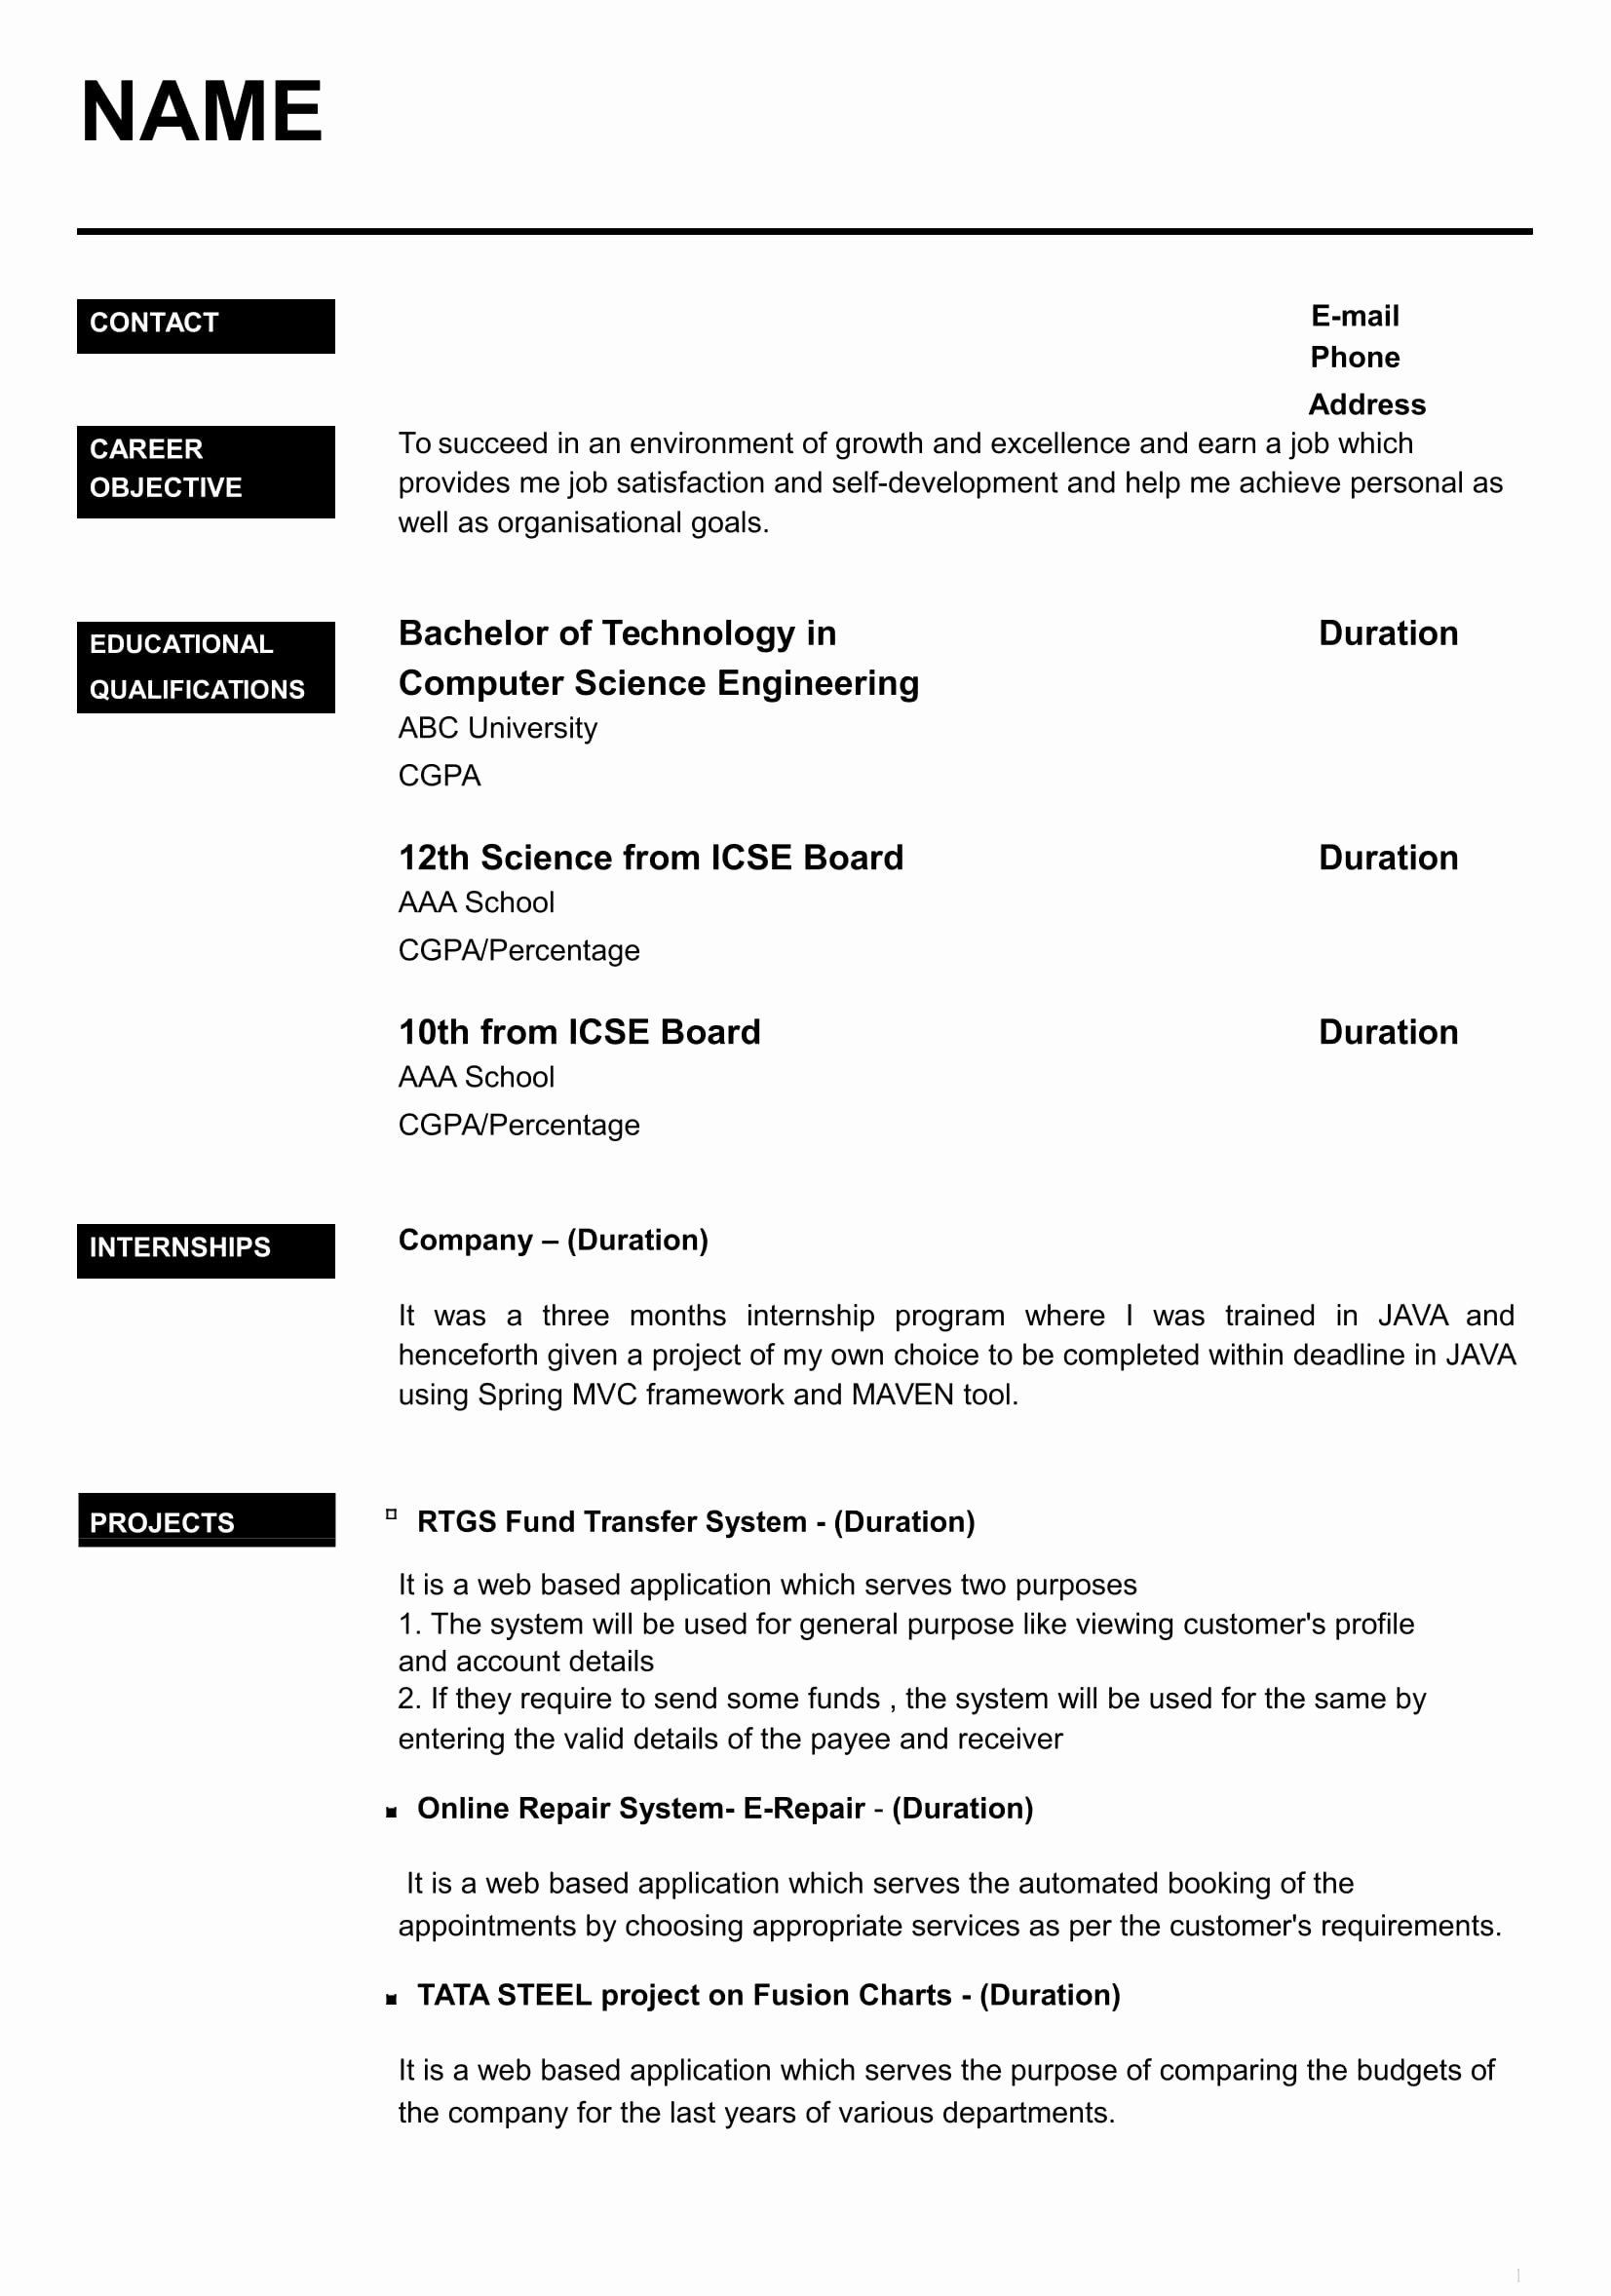 Sample Resume for Computer Science Fresh Graduate Pdf Resume with Picture Template New 32 Resume Templates for Freshers …